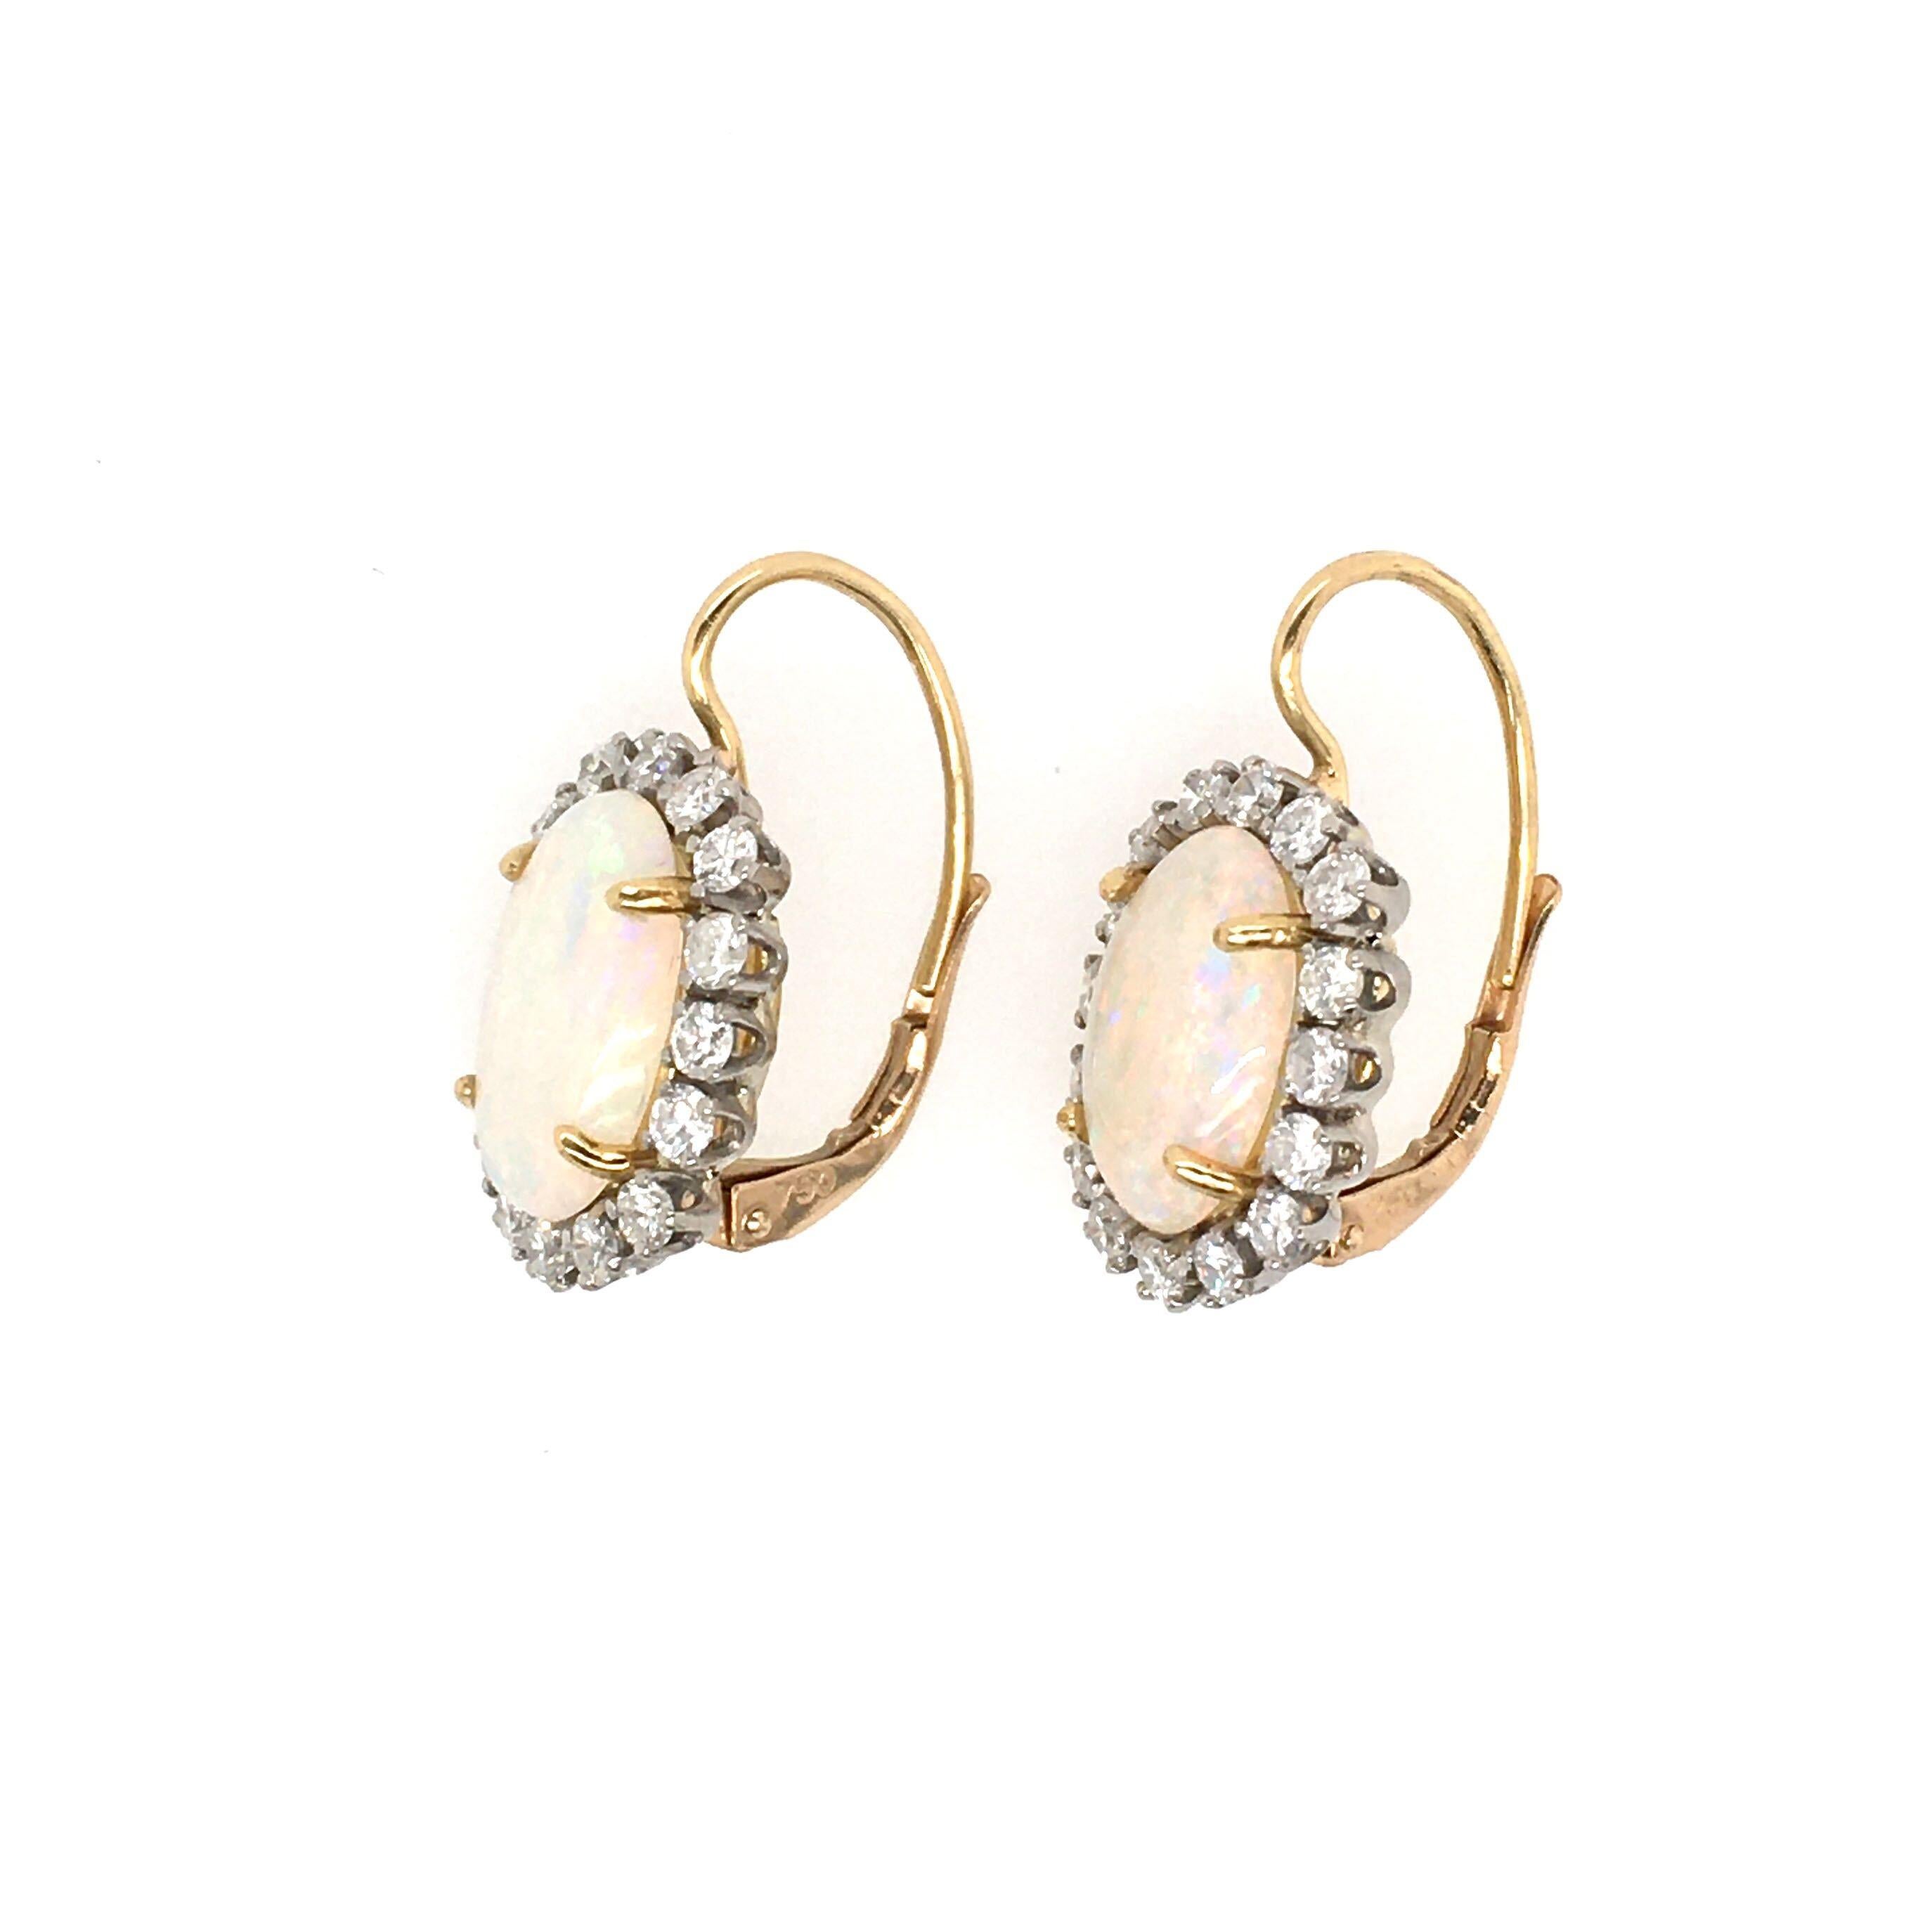 A pair of 18 karat yellow gold, opal and diamond earrings. Set with an oval cabochon opal, measuring approximately 12.0 x 9.0mm, within a circular cut diamond surround, with lever backs. Thirty two (32) diamonds weigh approximately 1.60 carats.